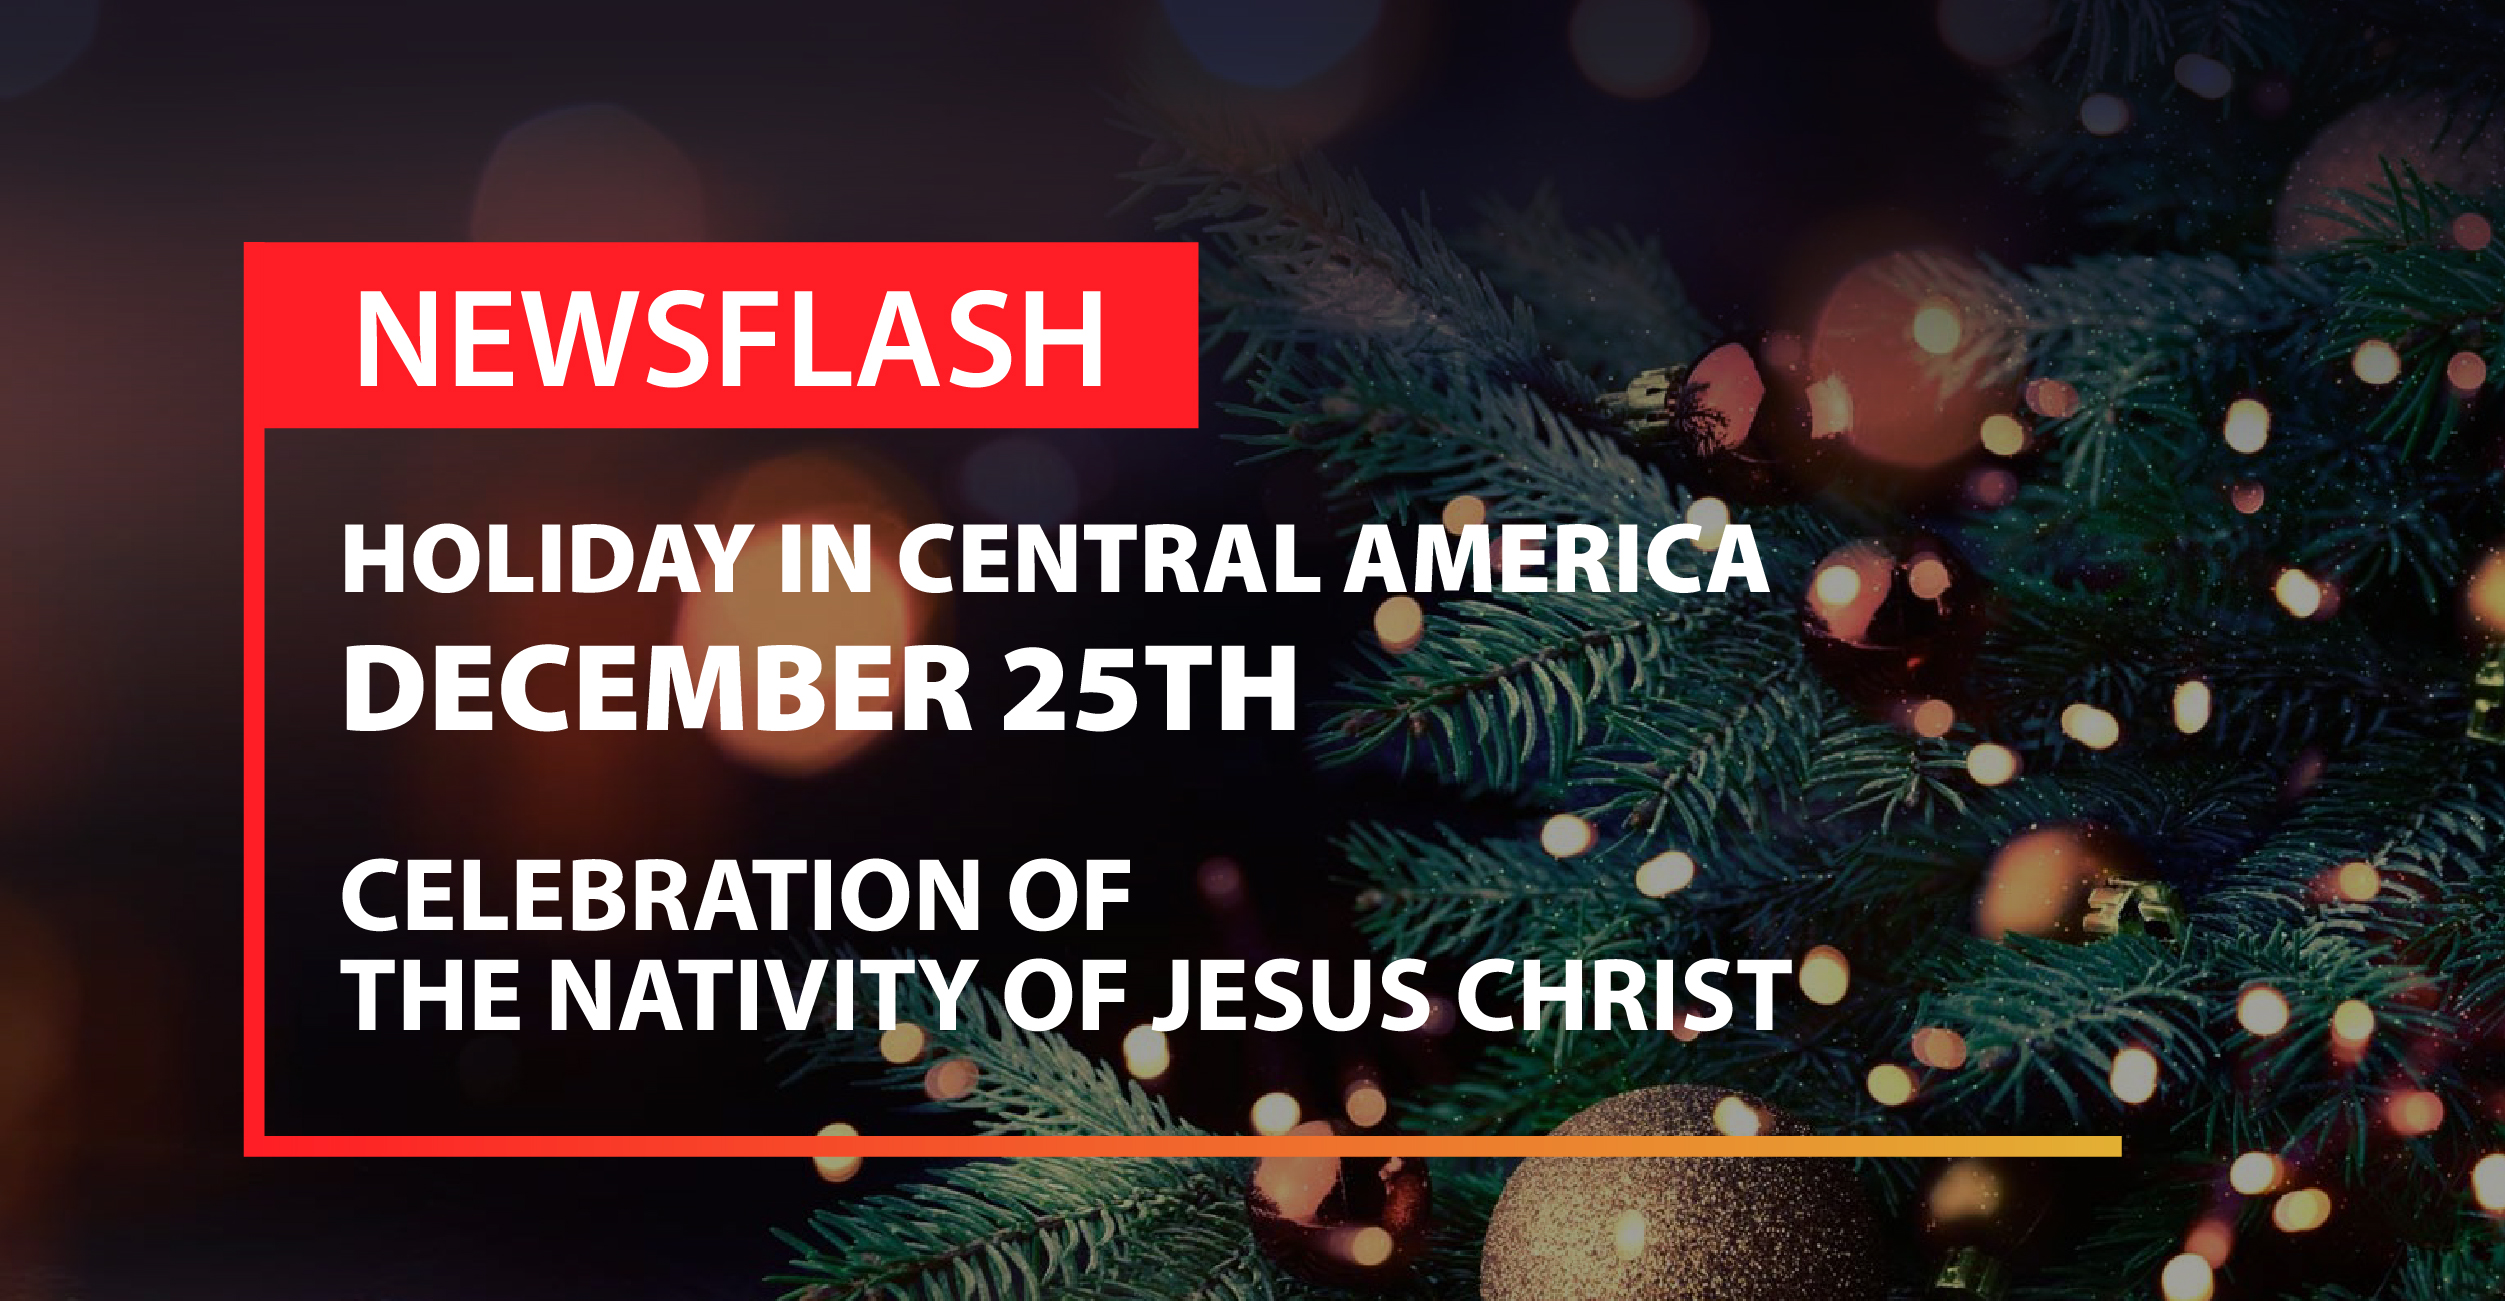 Newsflash: December 25th Holiday in Central America